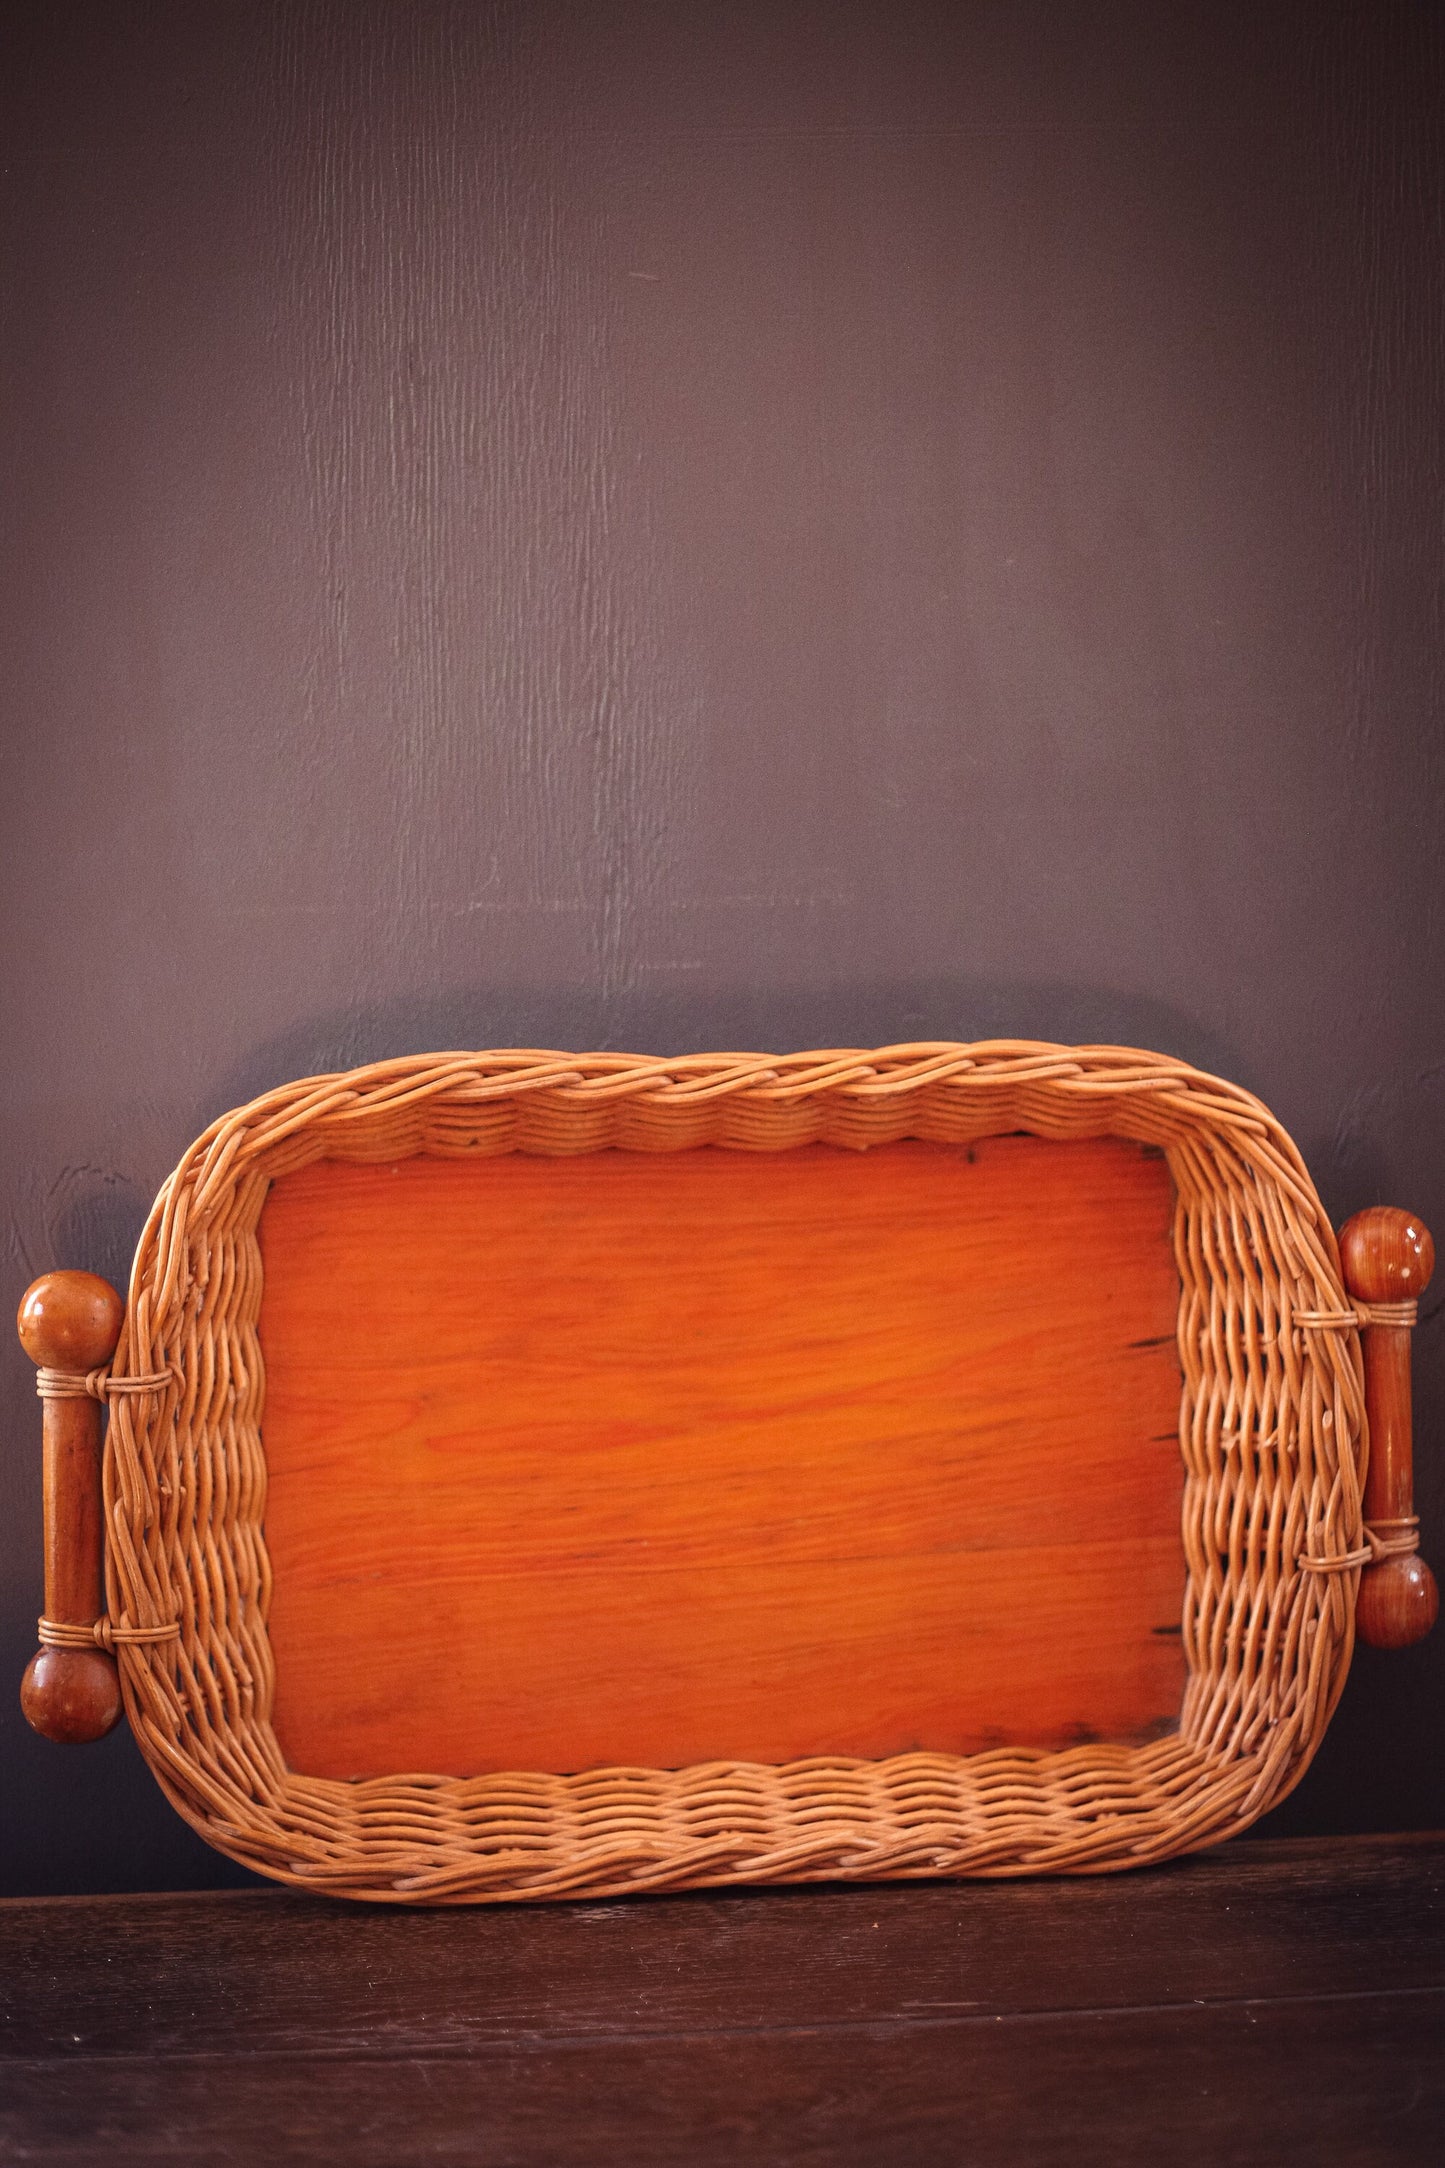 Wicker and Wood Bottom Serving Tray - Vintage Rectangular Wicker/Rattan Breakfast/Dining Tray